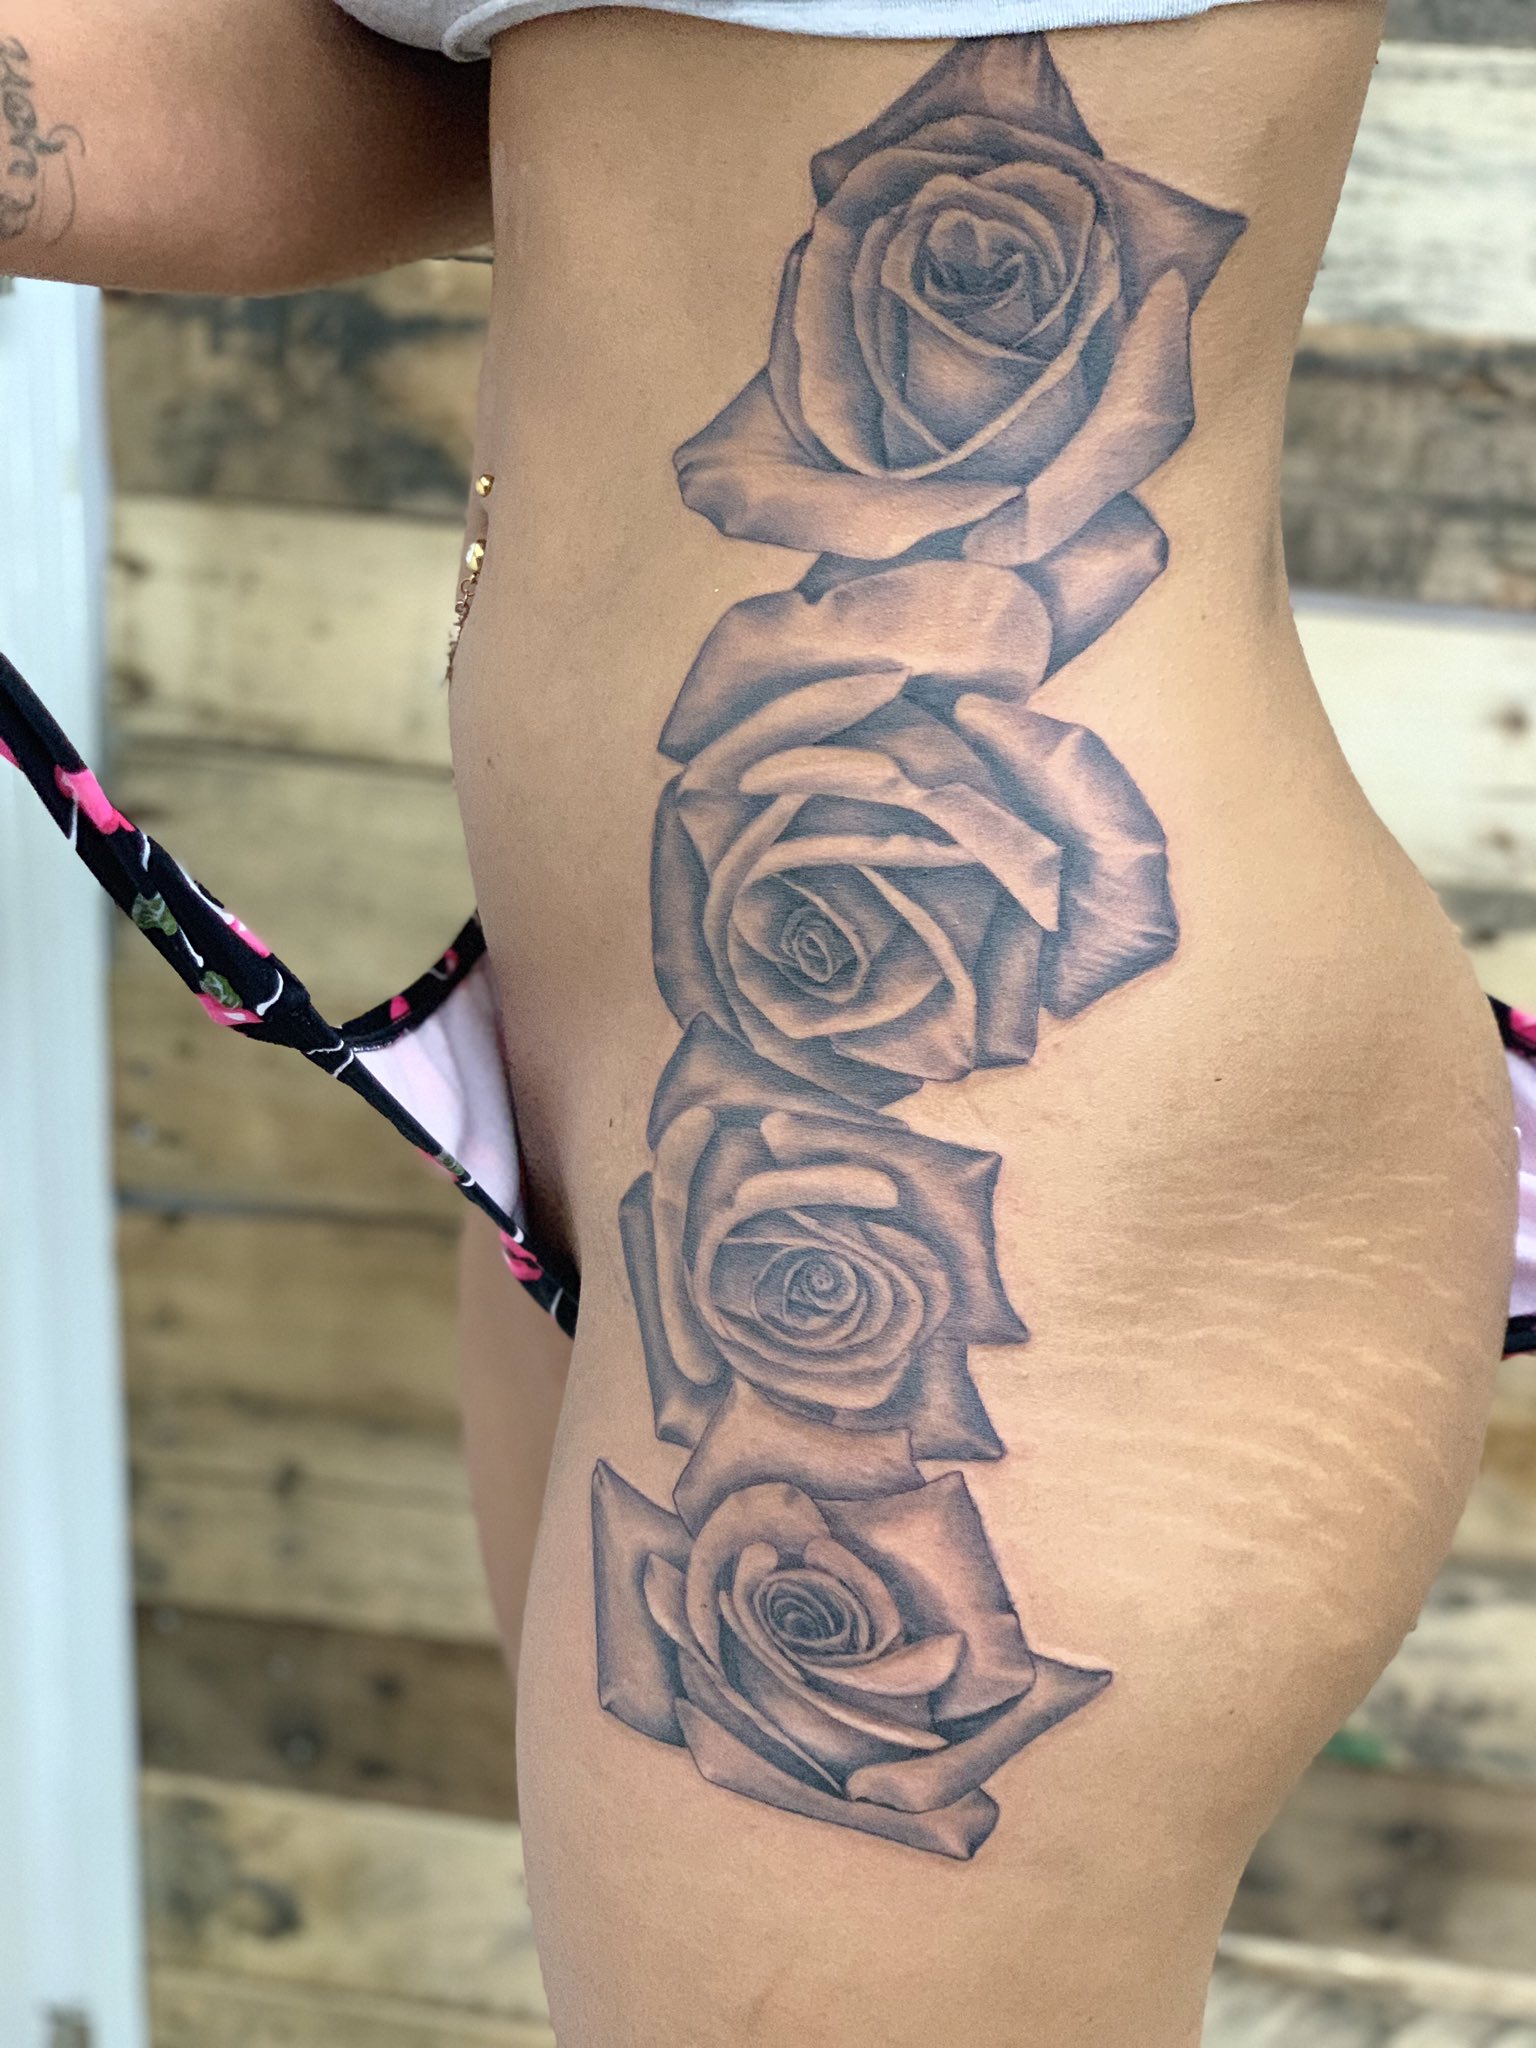 Rose  Thorn Tattoo  Done by inkflowertattoo  Facebook